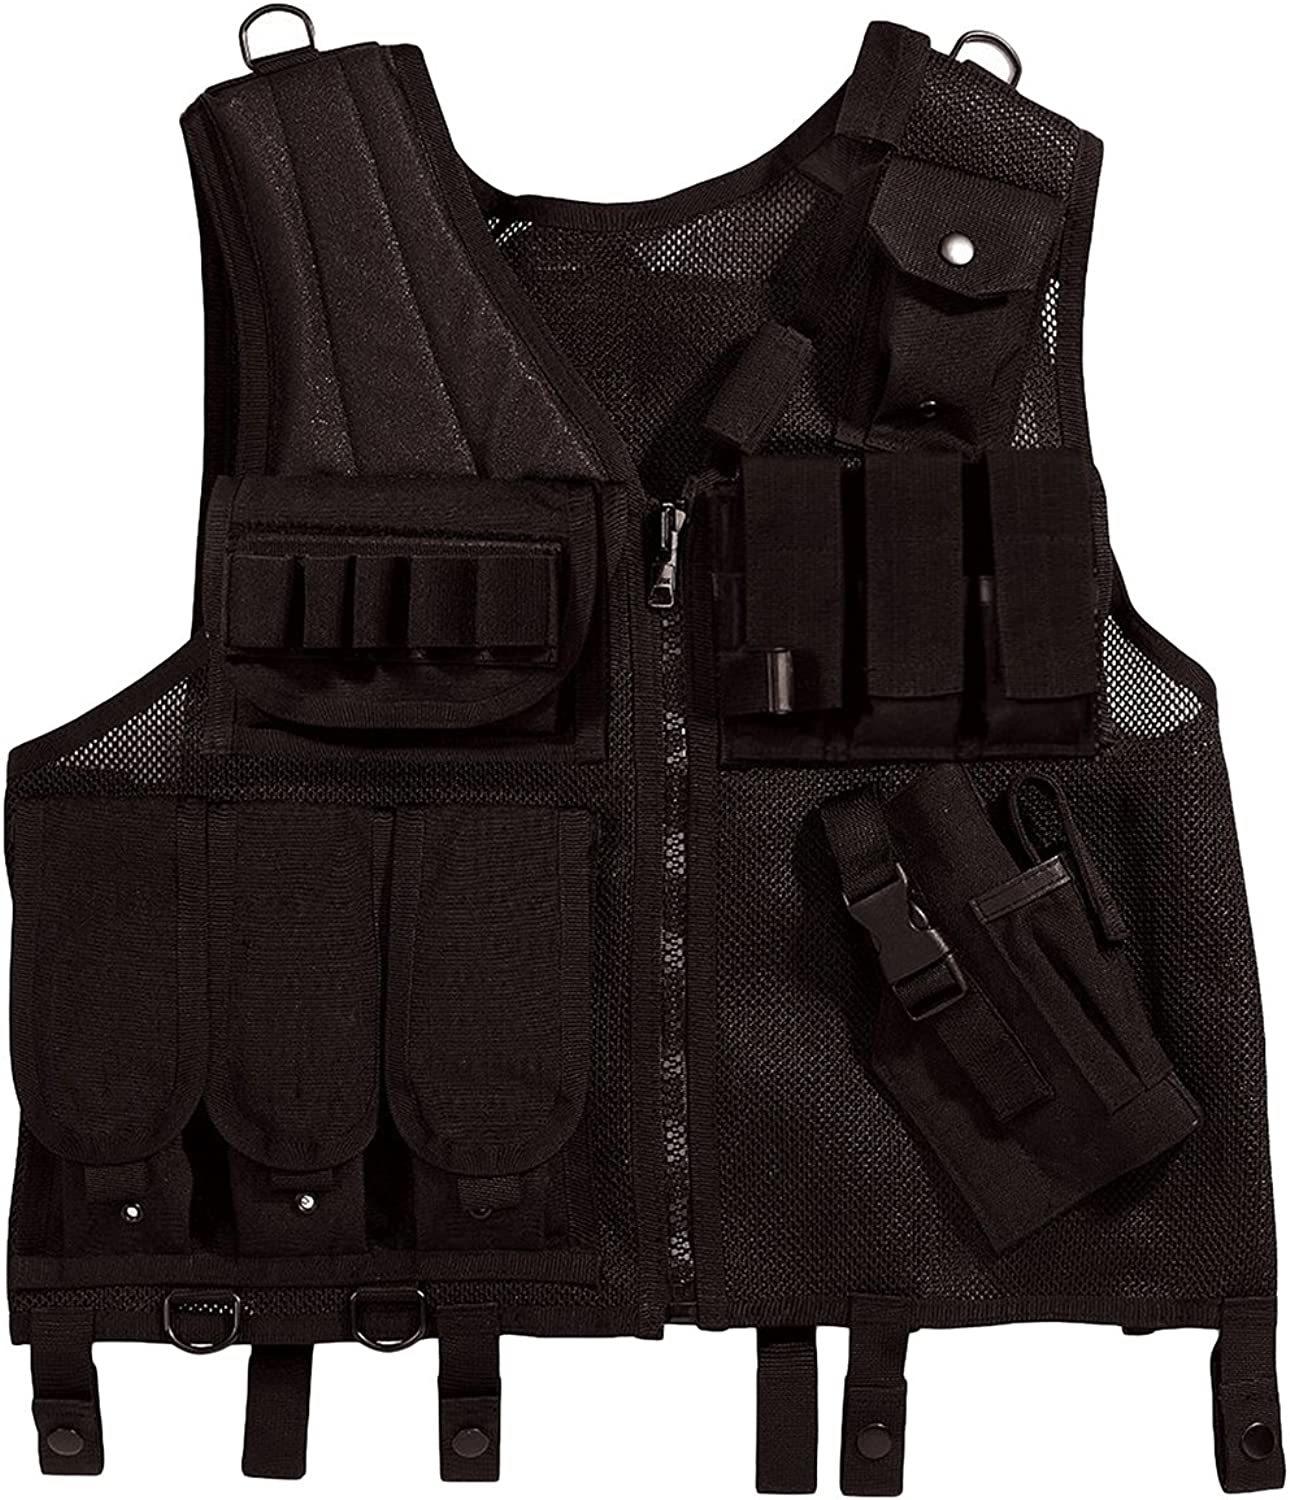 Rothco Quick Draw Tactical Vest, Black